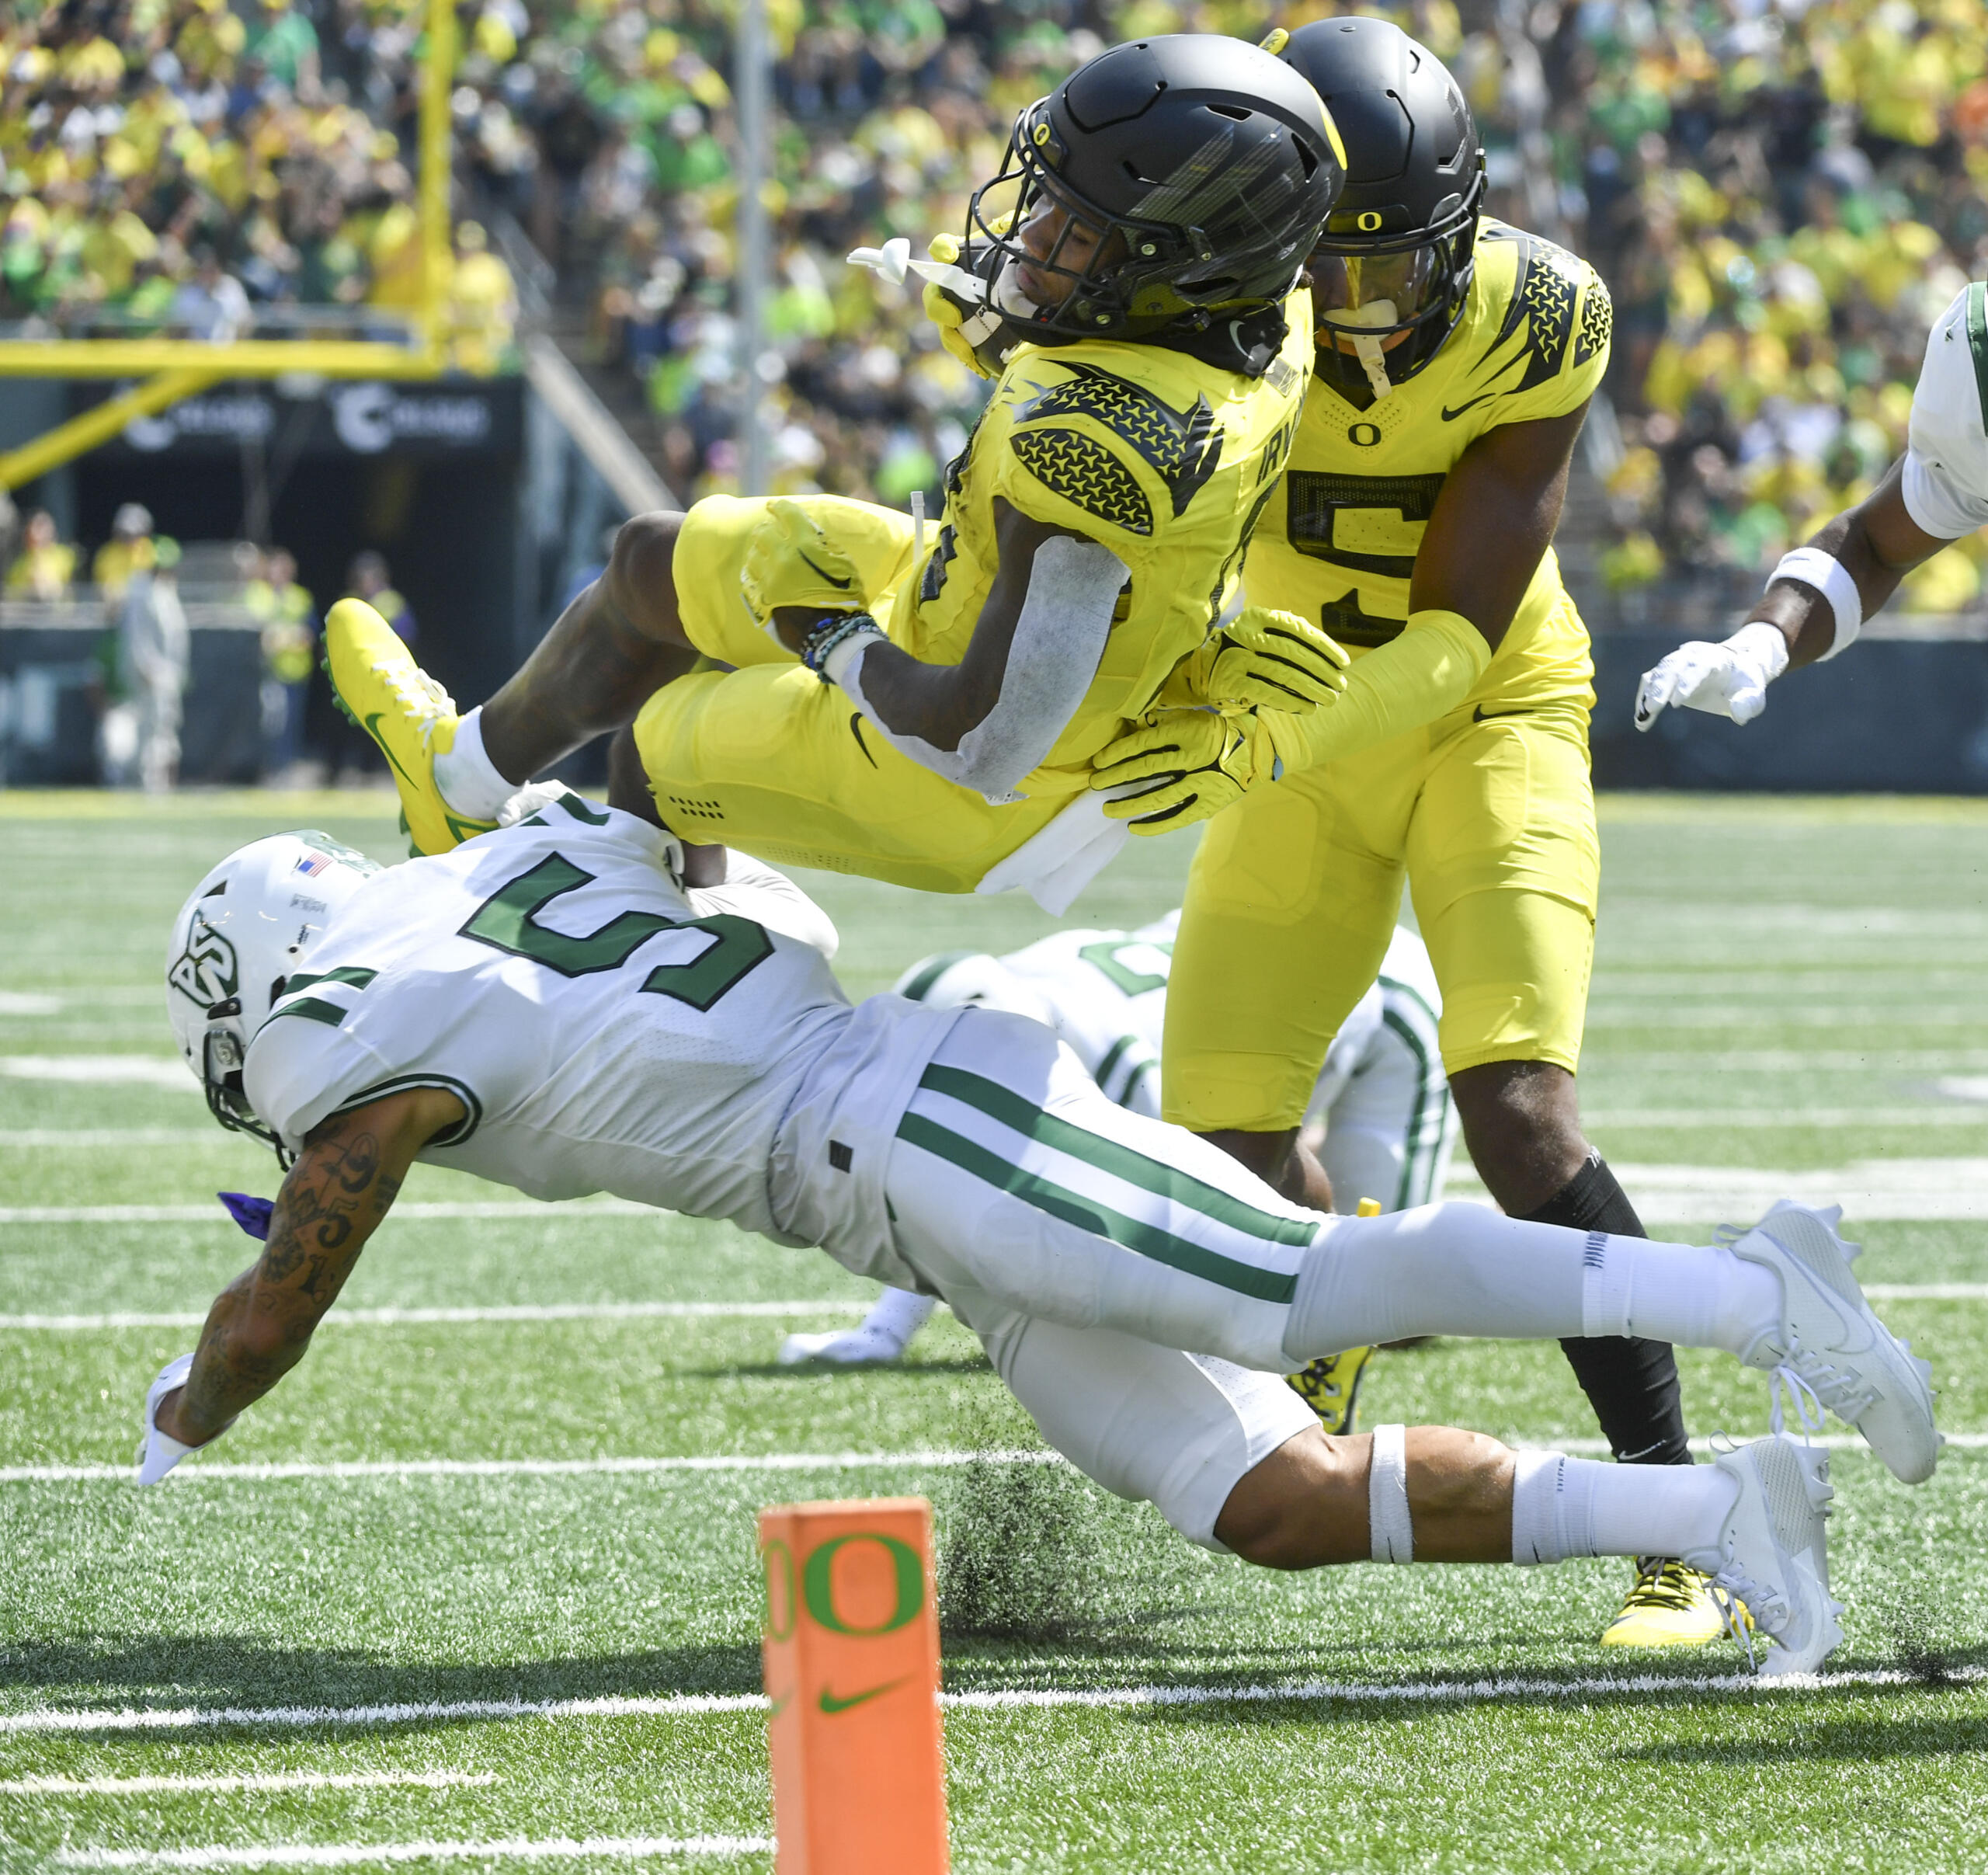 Oregon running back Bucky Irving (0) is stopped short of the goal line by Portland State defensive back Tyreese Shakir (5) as wide receiver Traeshon Holden trails on the play during the first half of an NCAA college football game Saturday, Sept. 2, 2023, in Eugene, Ore.